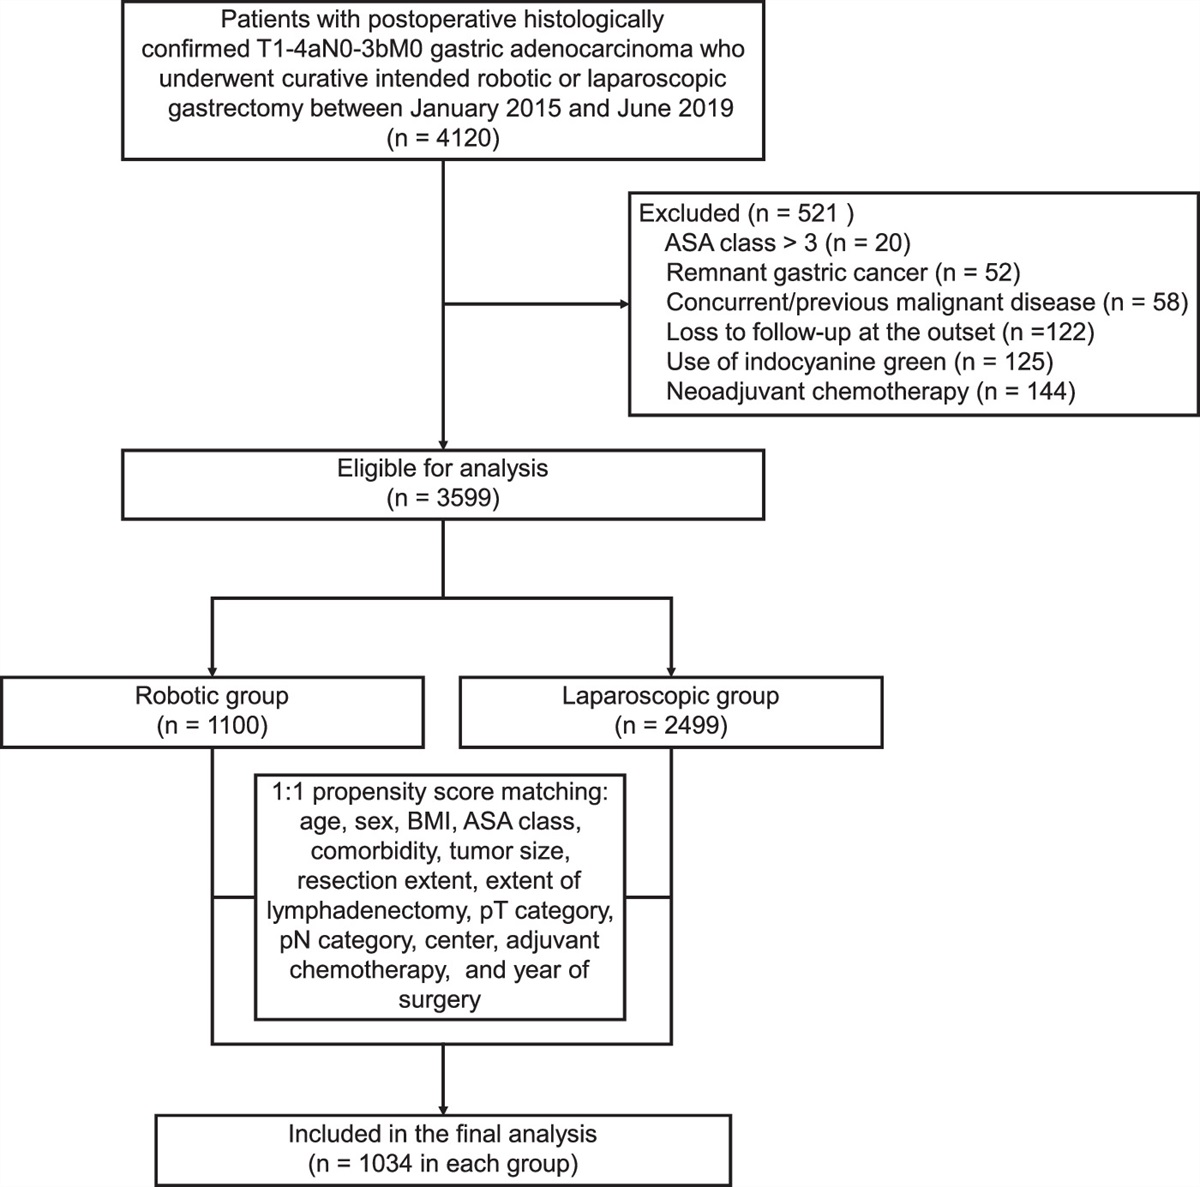 Comparison of Short-term and Three-year Oncological Outcomes Between Robotic and Laparoscopic Gastrectomy for Gastric Cancer: A Large Multicenter Cohort Study